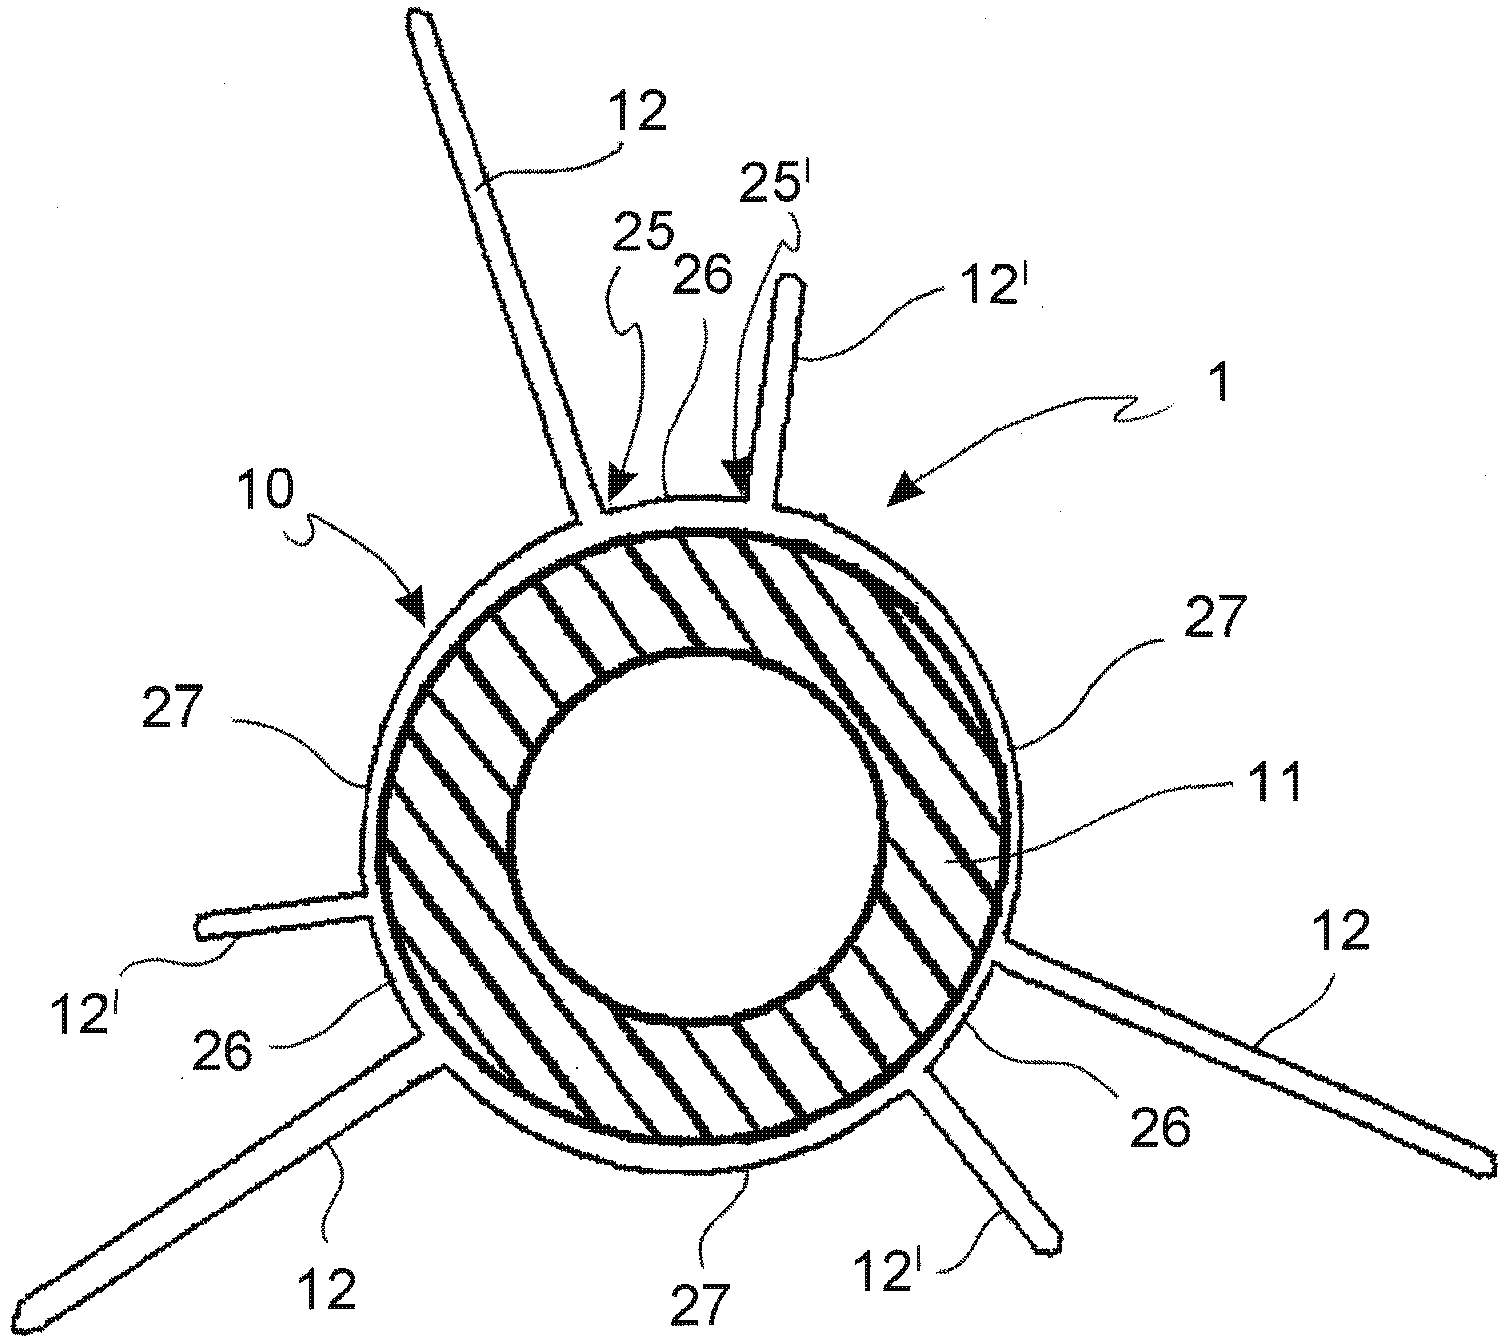 Drug eluting balloon for the treatment of stenosis and method for manufacturing the balloon